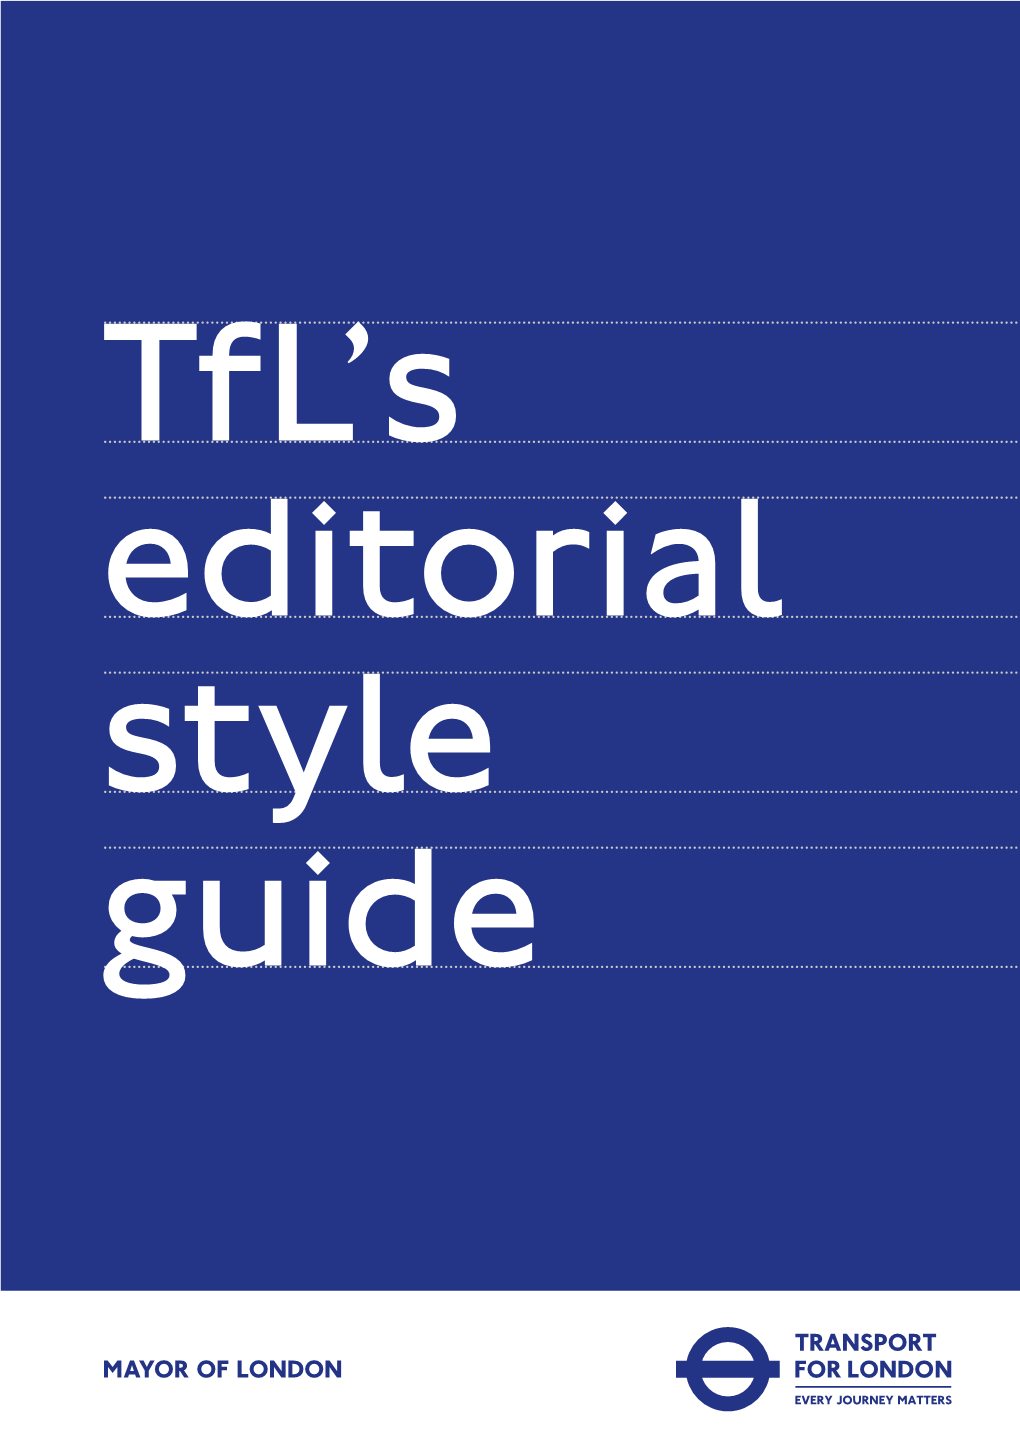 Tfl Editorial Style Guide 9 Bb Bb Blind This Term Implies Total Sight Loss